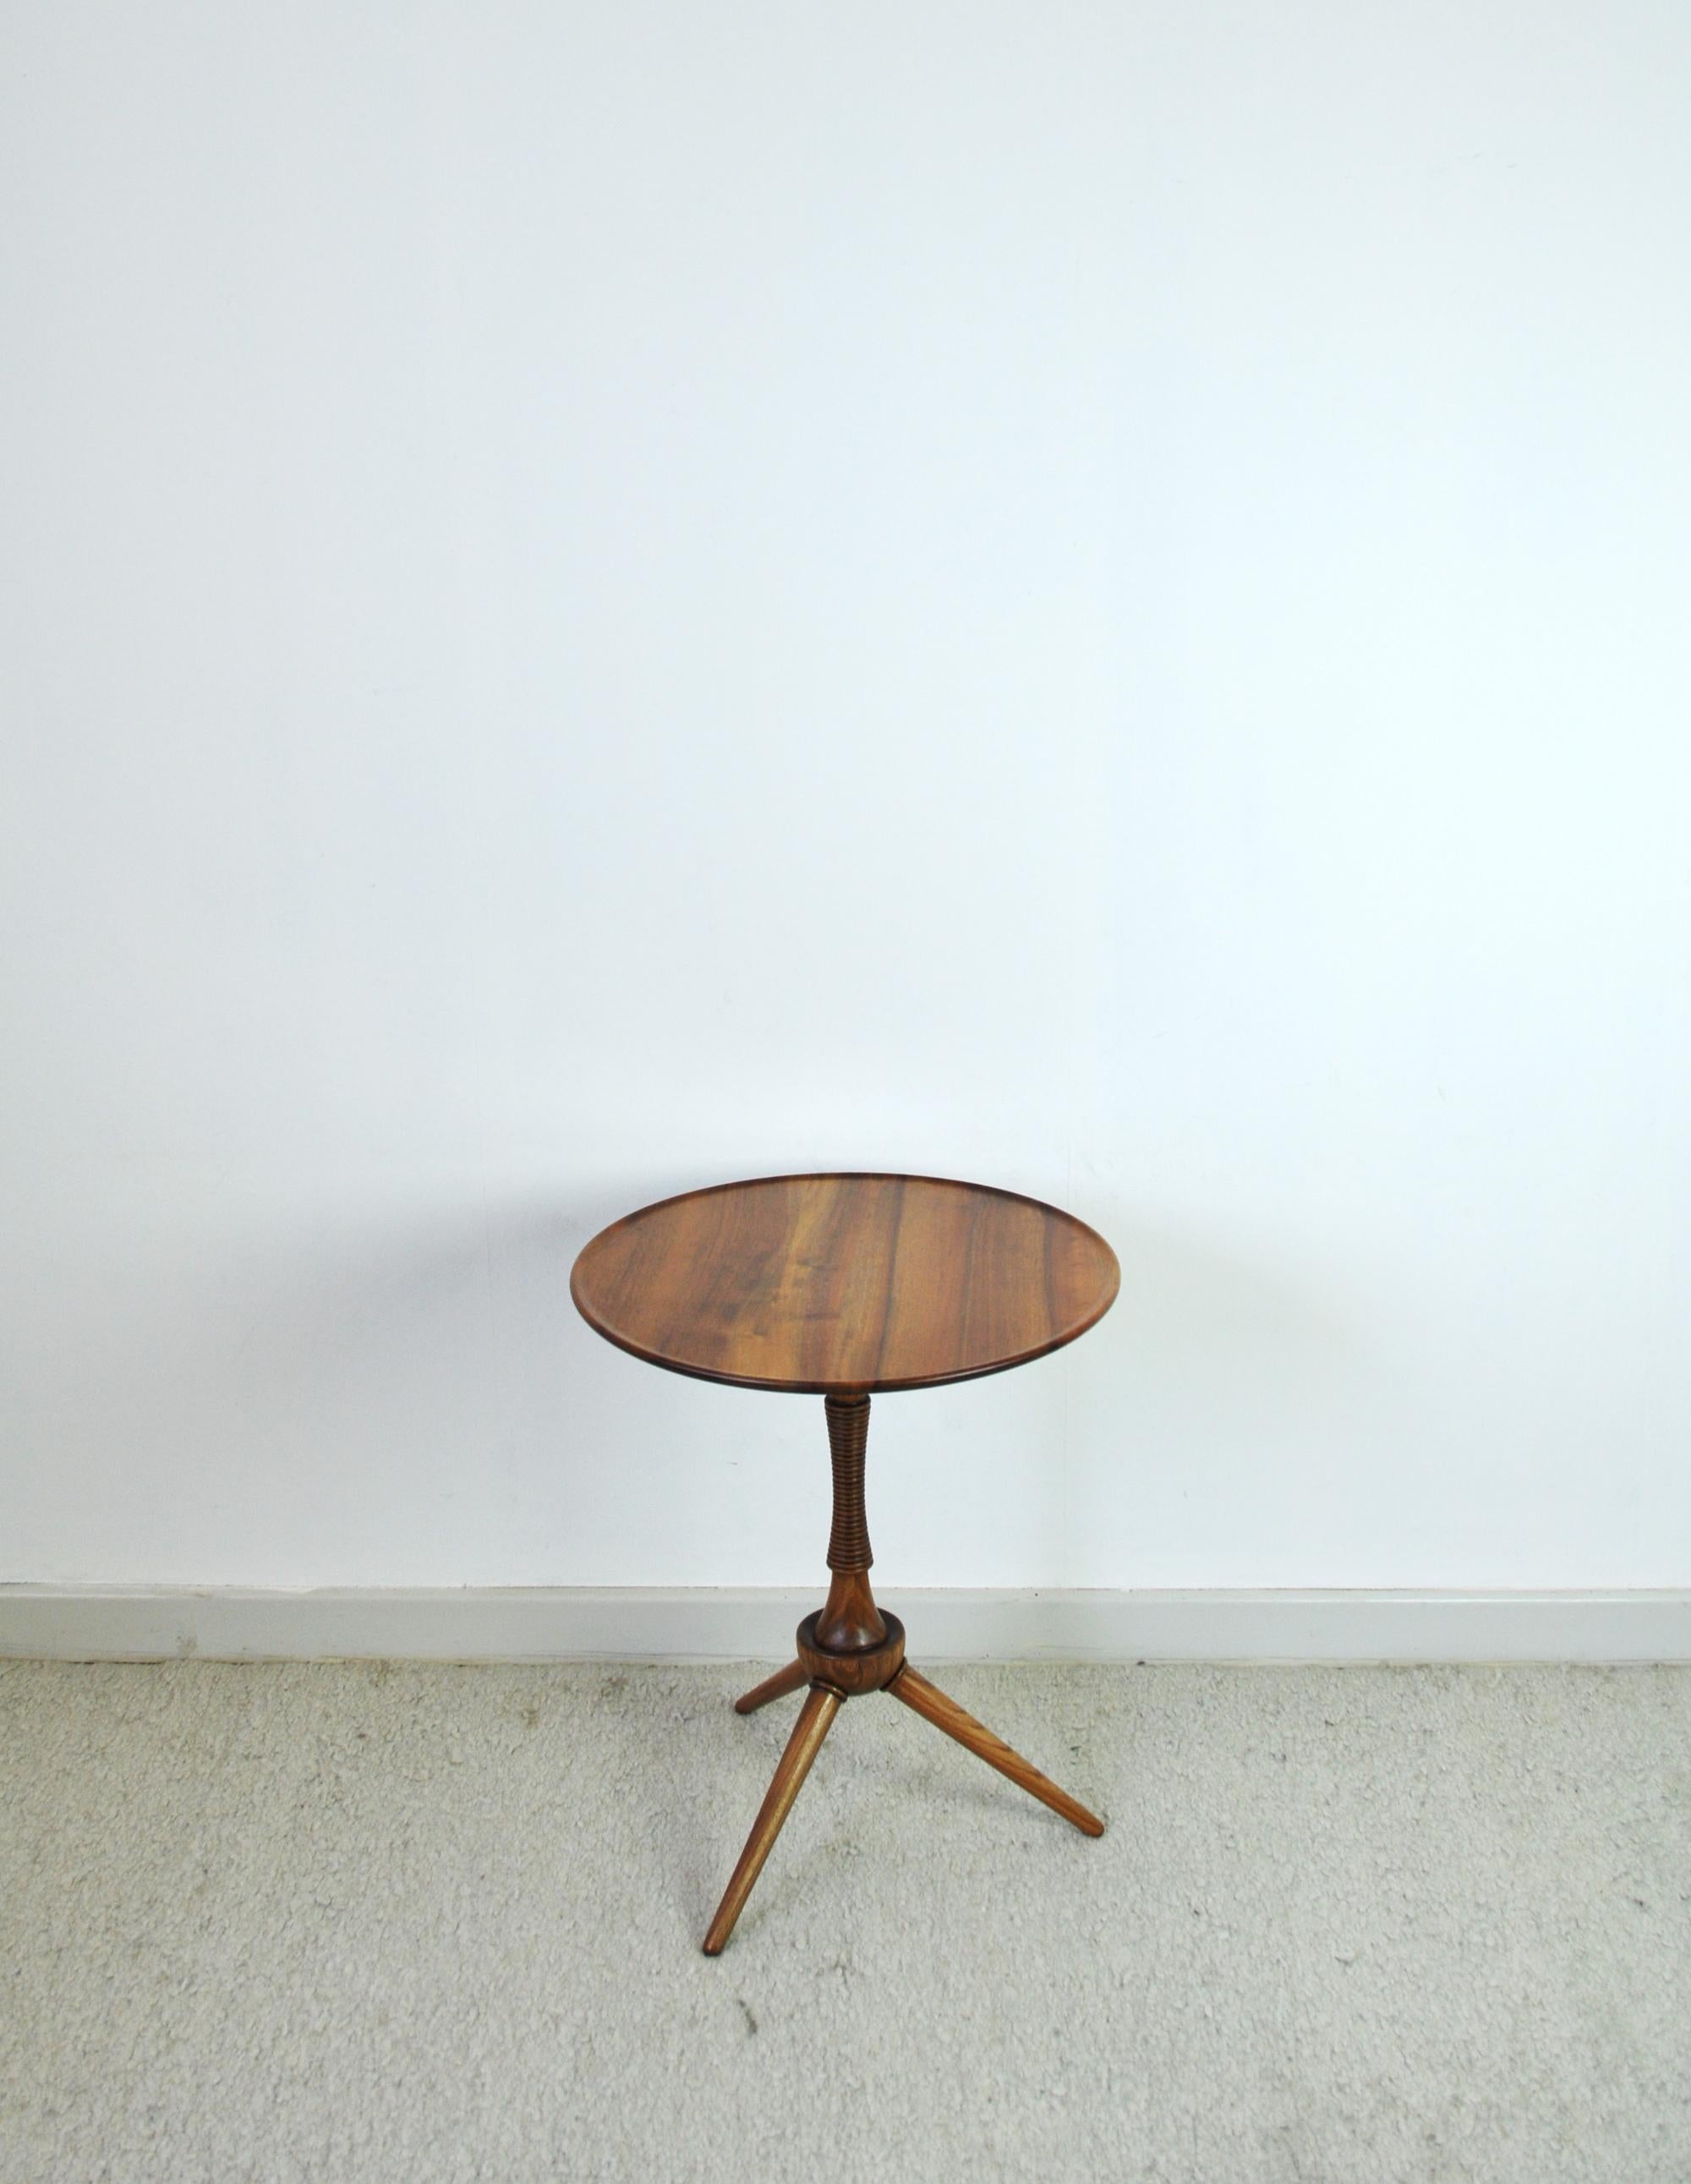 Side table in solid mahogany with elegant details with a touch of Art Deco designed by cabinetmaker Frits Henningsen. Made in Denmark in the 1940s.

Dimensions:
Diameter 45 cm
Height 53 cm.